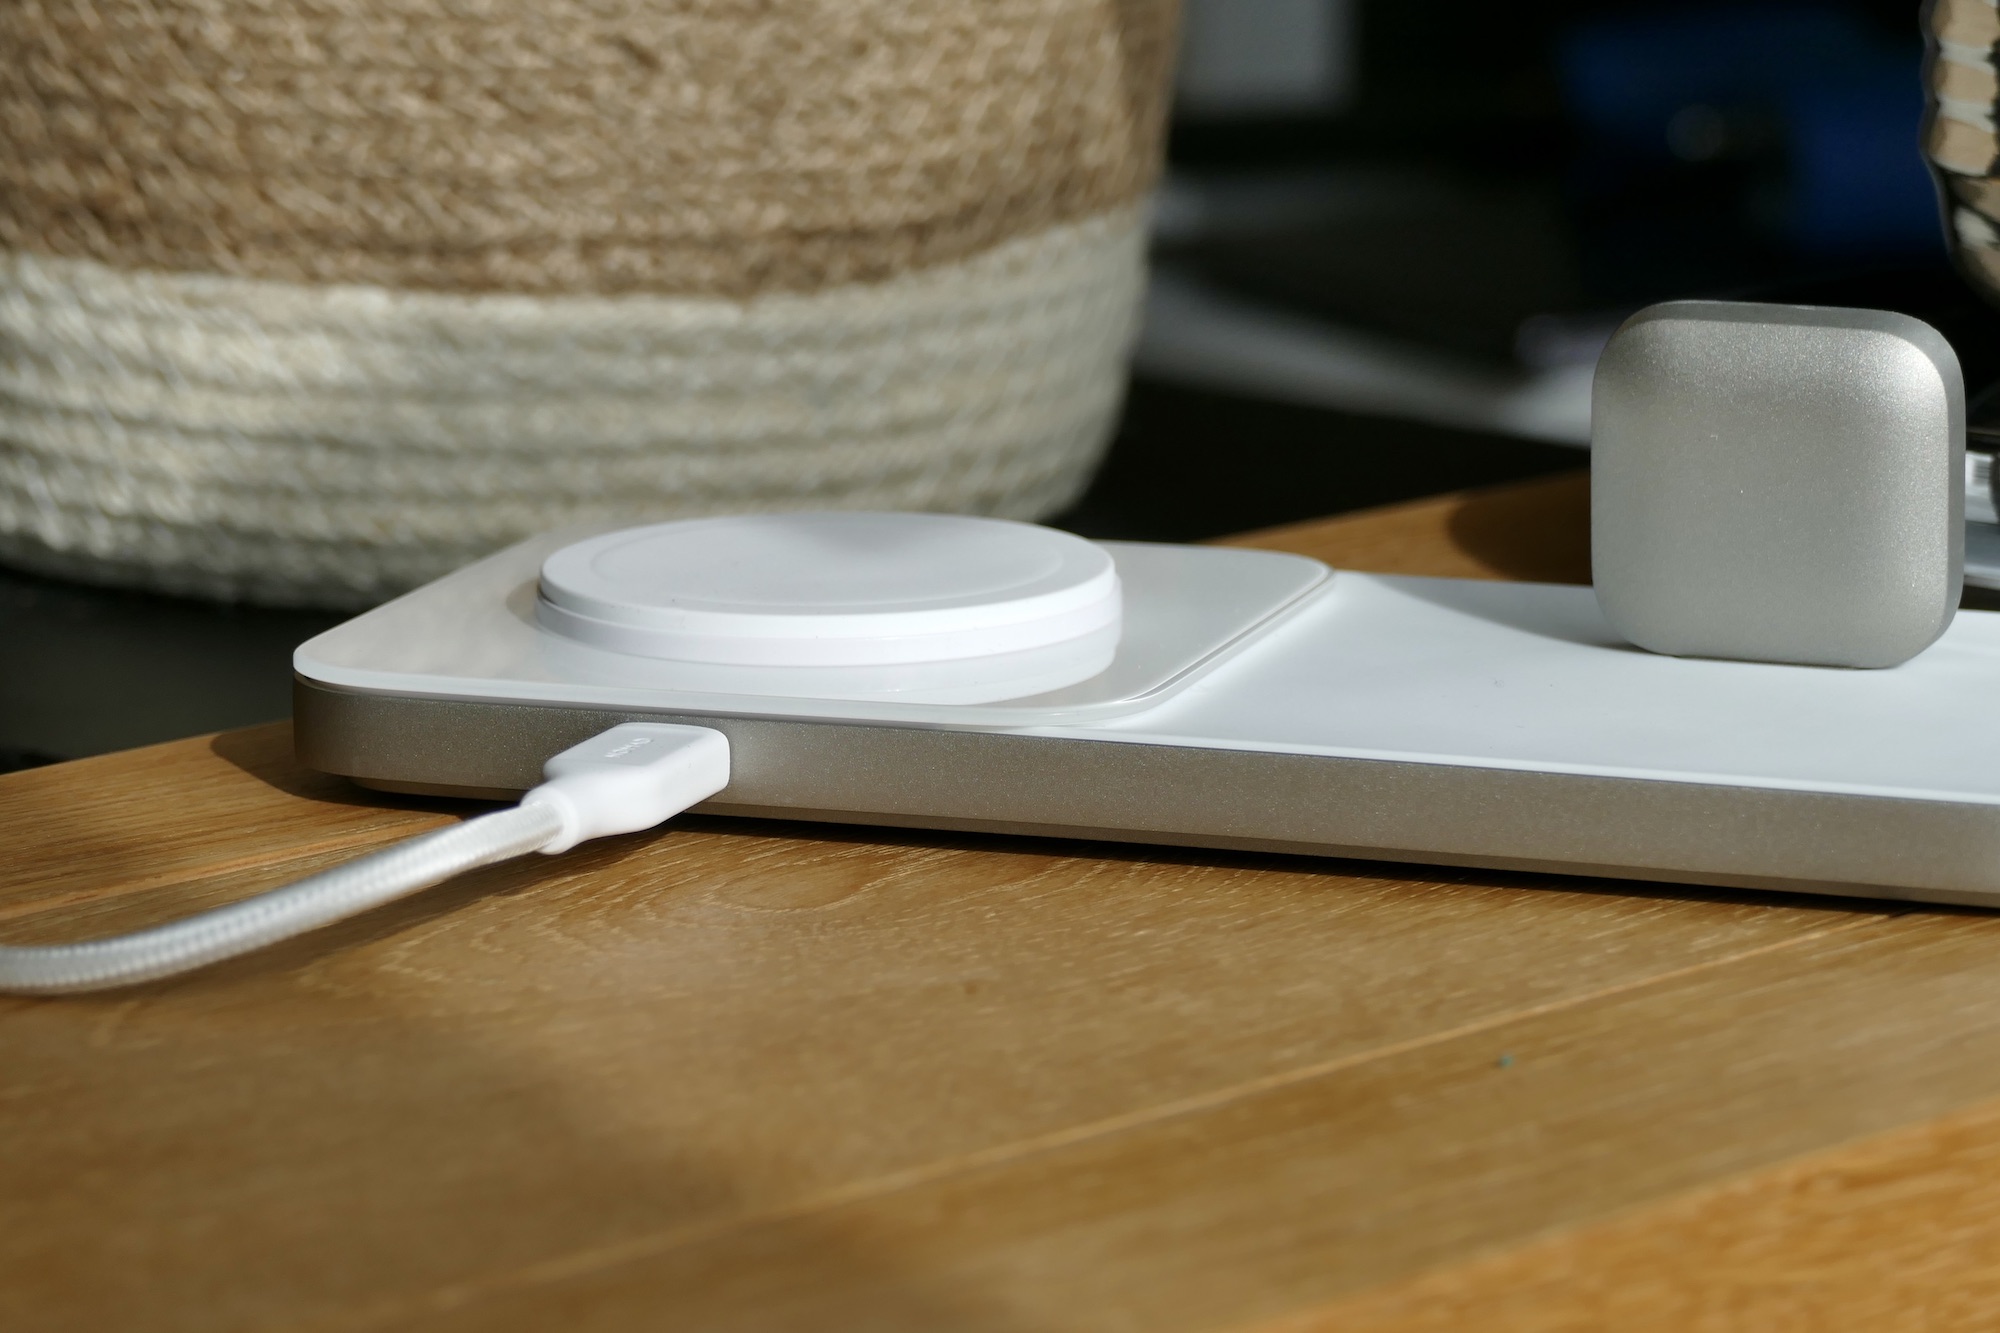 The MagSafe charging plate on the Nomad Base One Max.